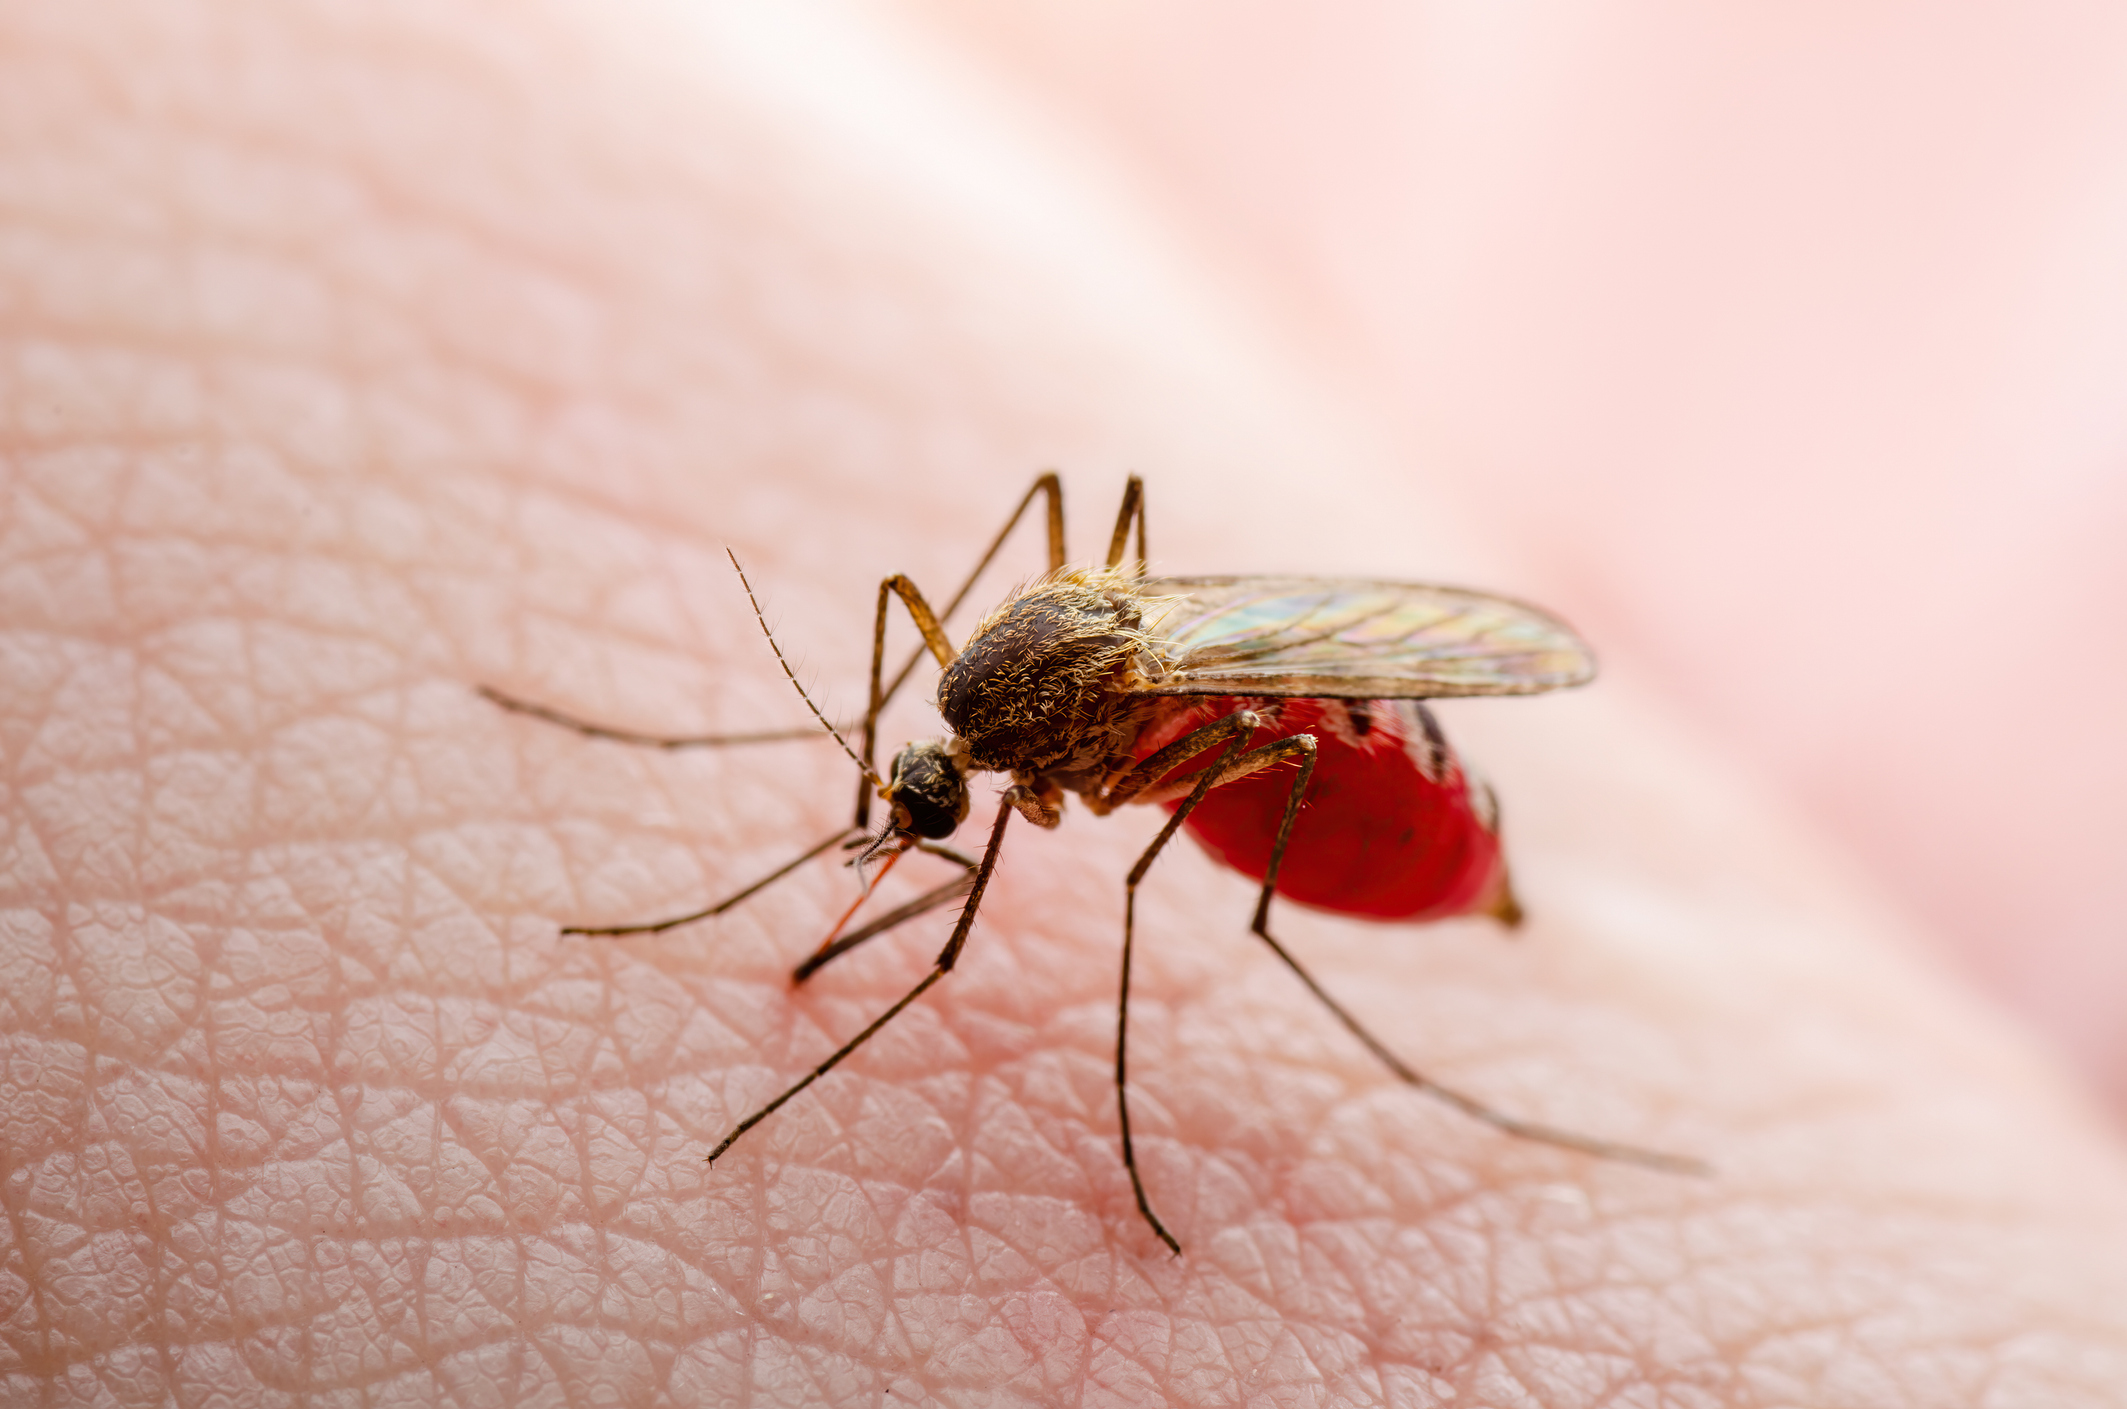 A culex mosquito drinking blood